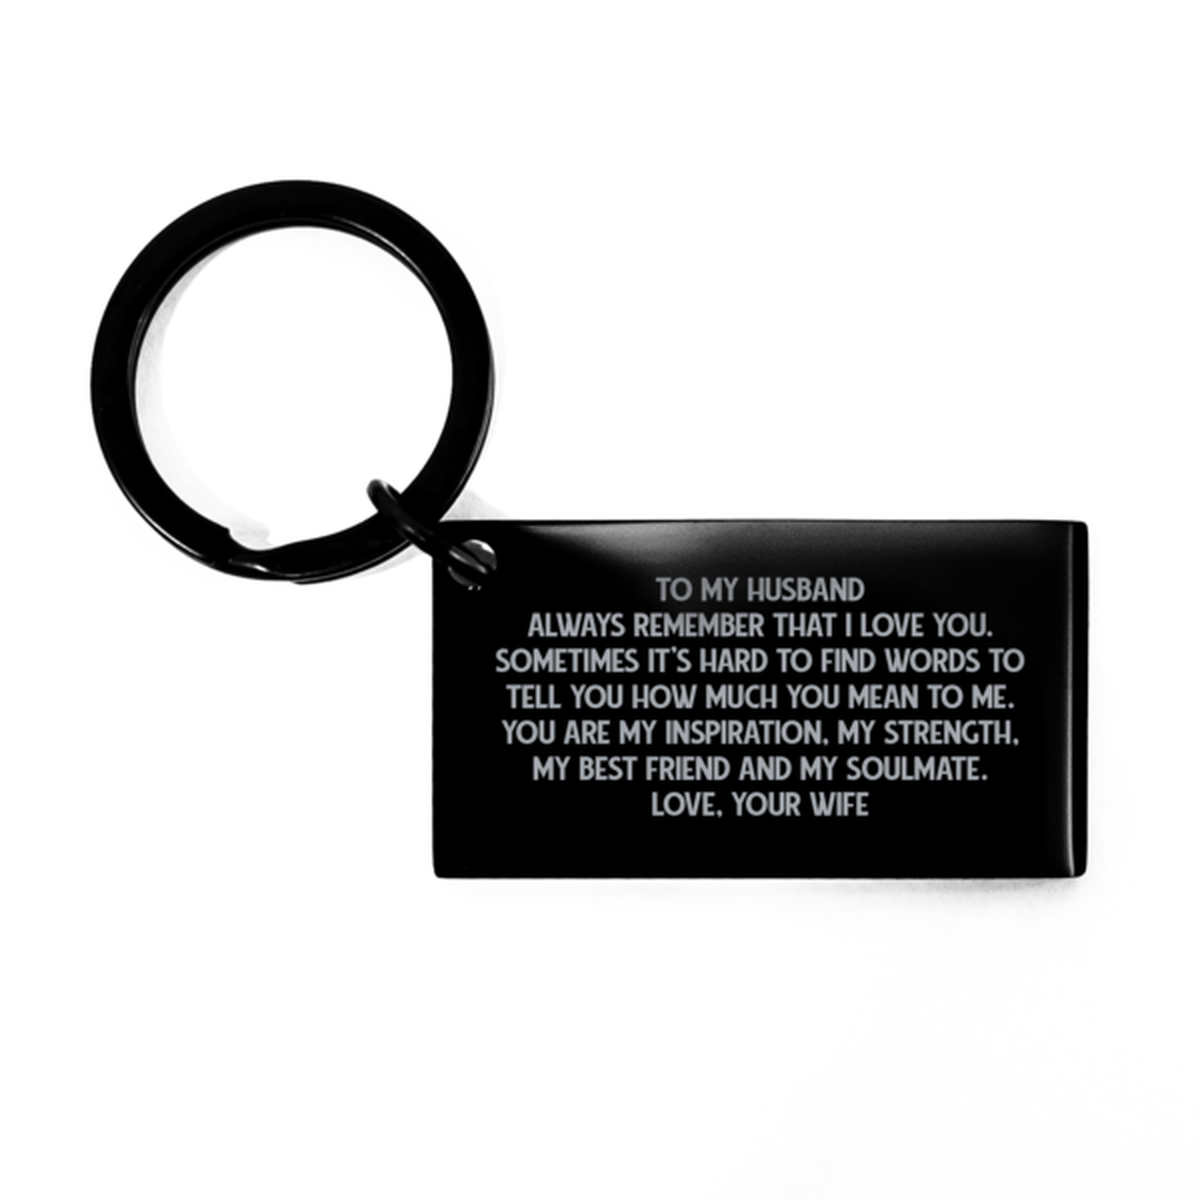 To My Husband Black Keychain, Always Remember That I Love You, Anniversary Gifts For Husband From Wife, Birthday Gifts For Men